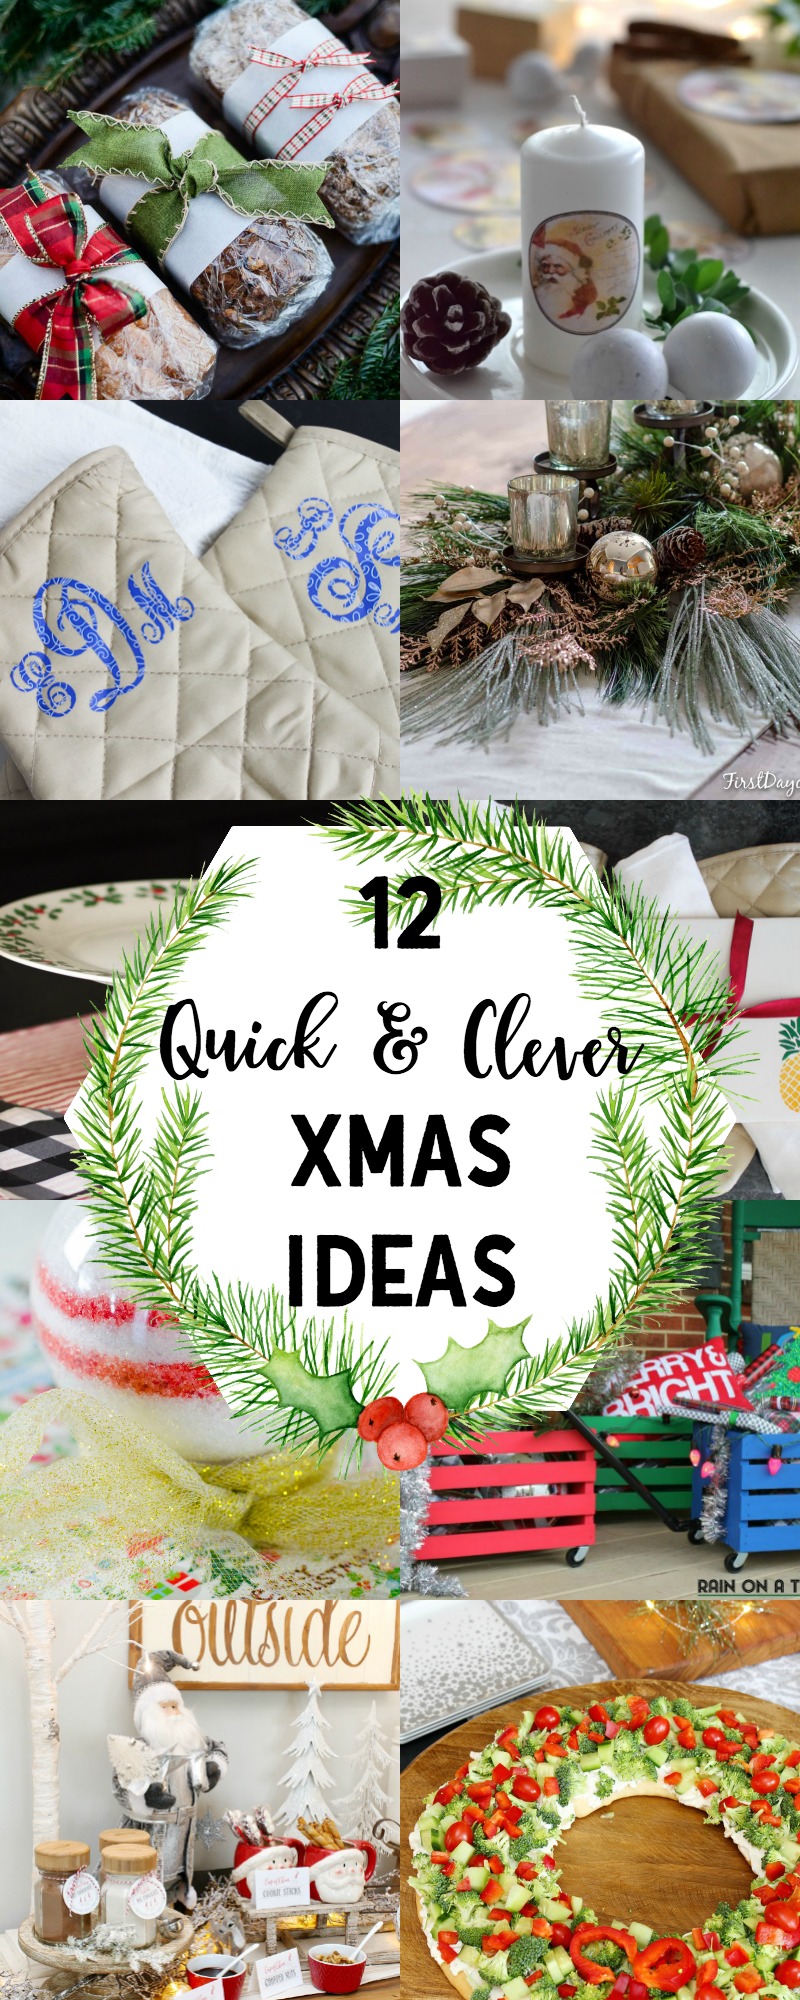 Quick & Clever Christmas Ideas